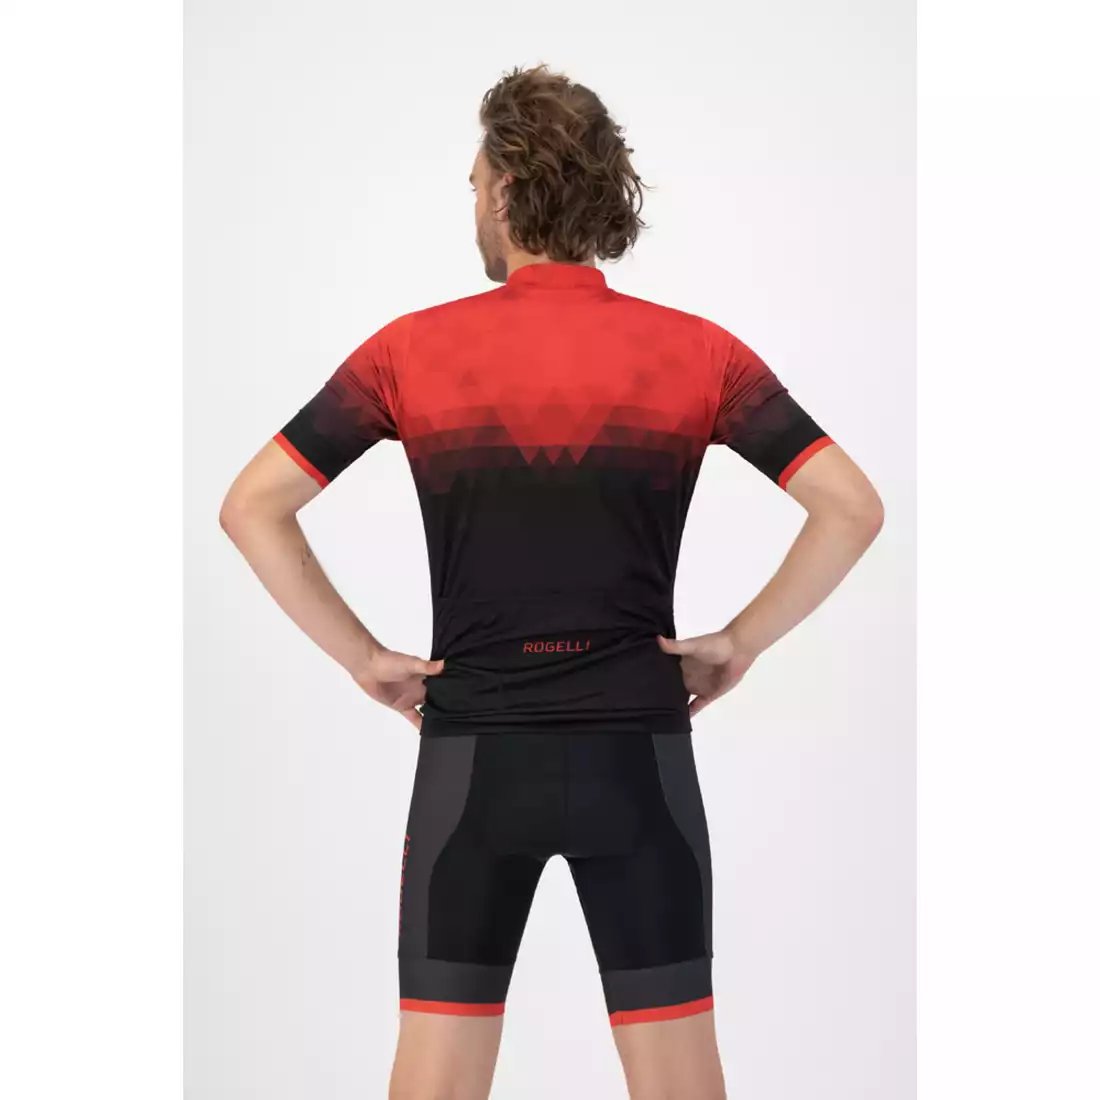 ROGELLI SPHERE Men's cycling jersey, black and red